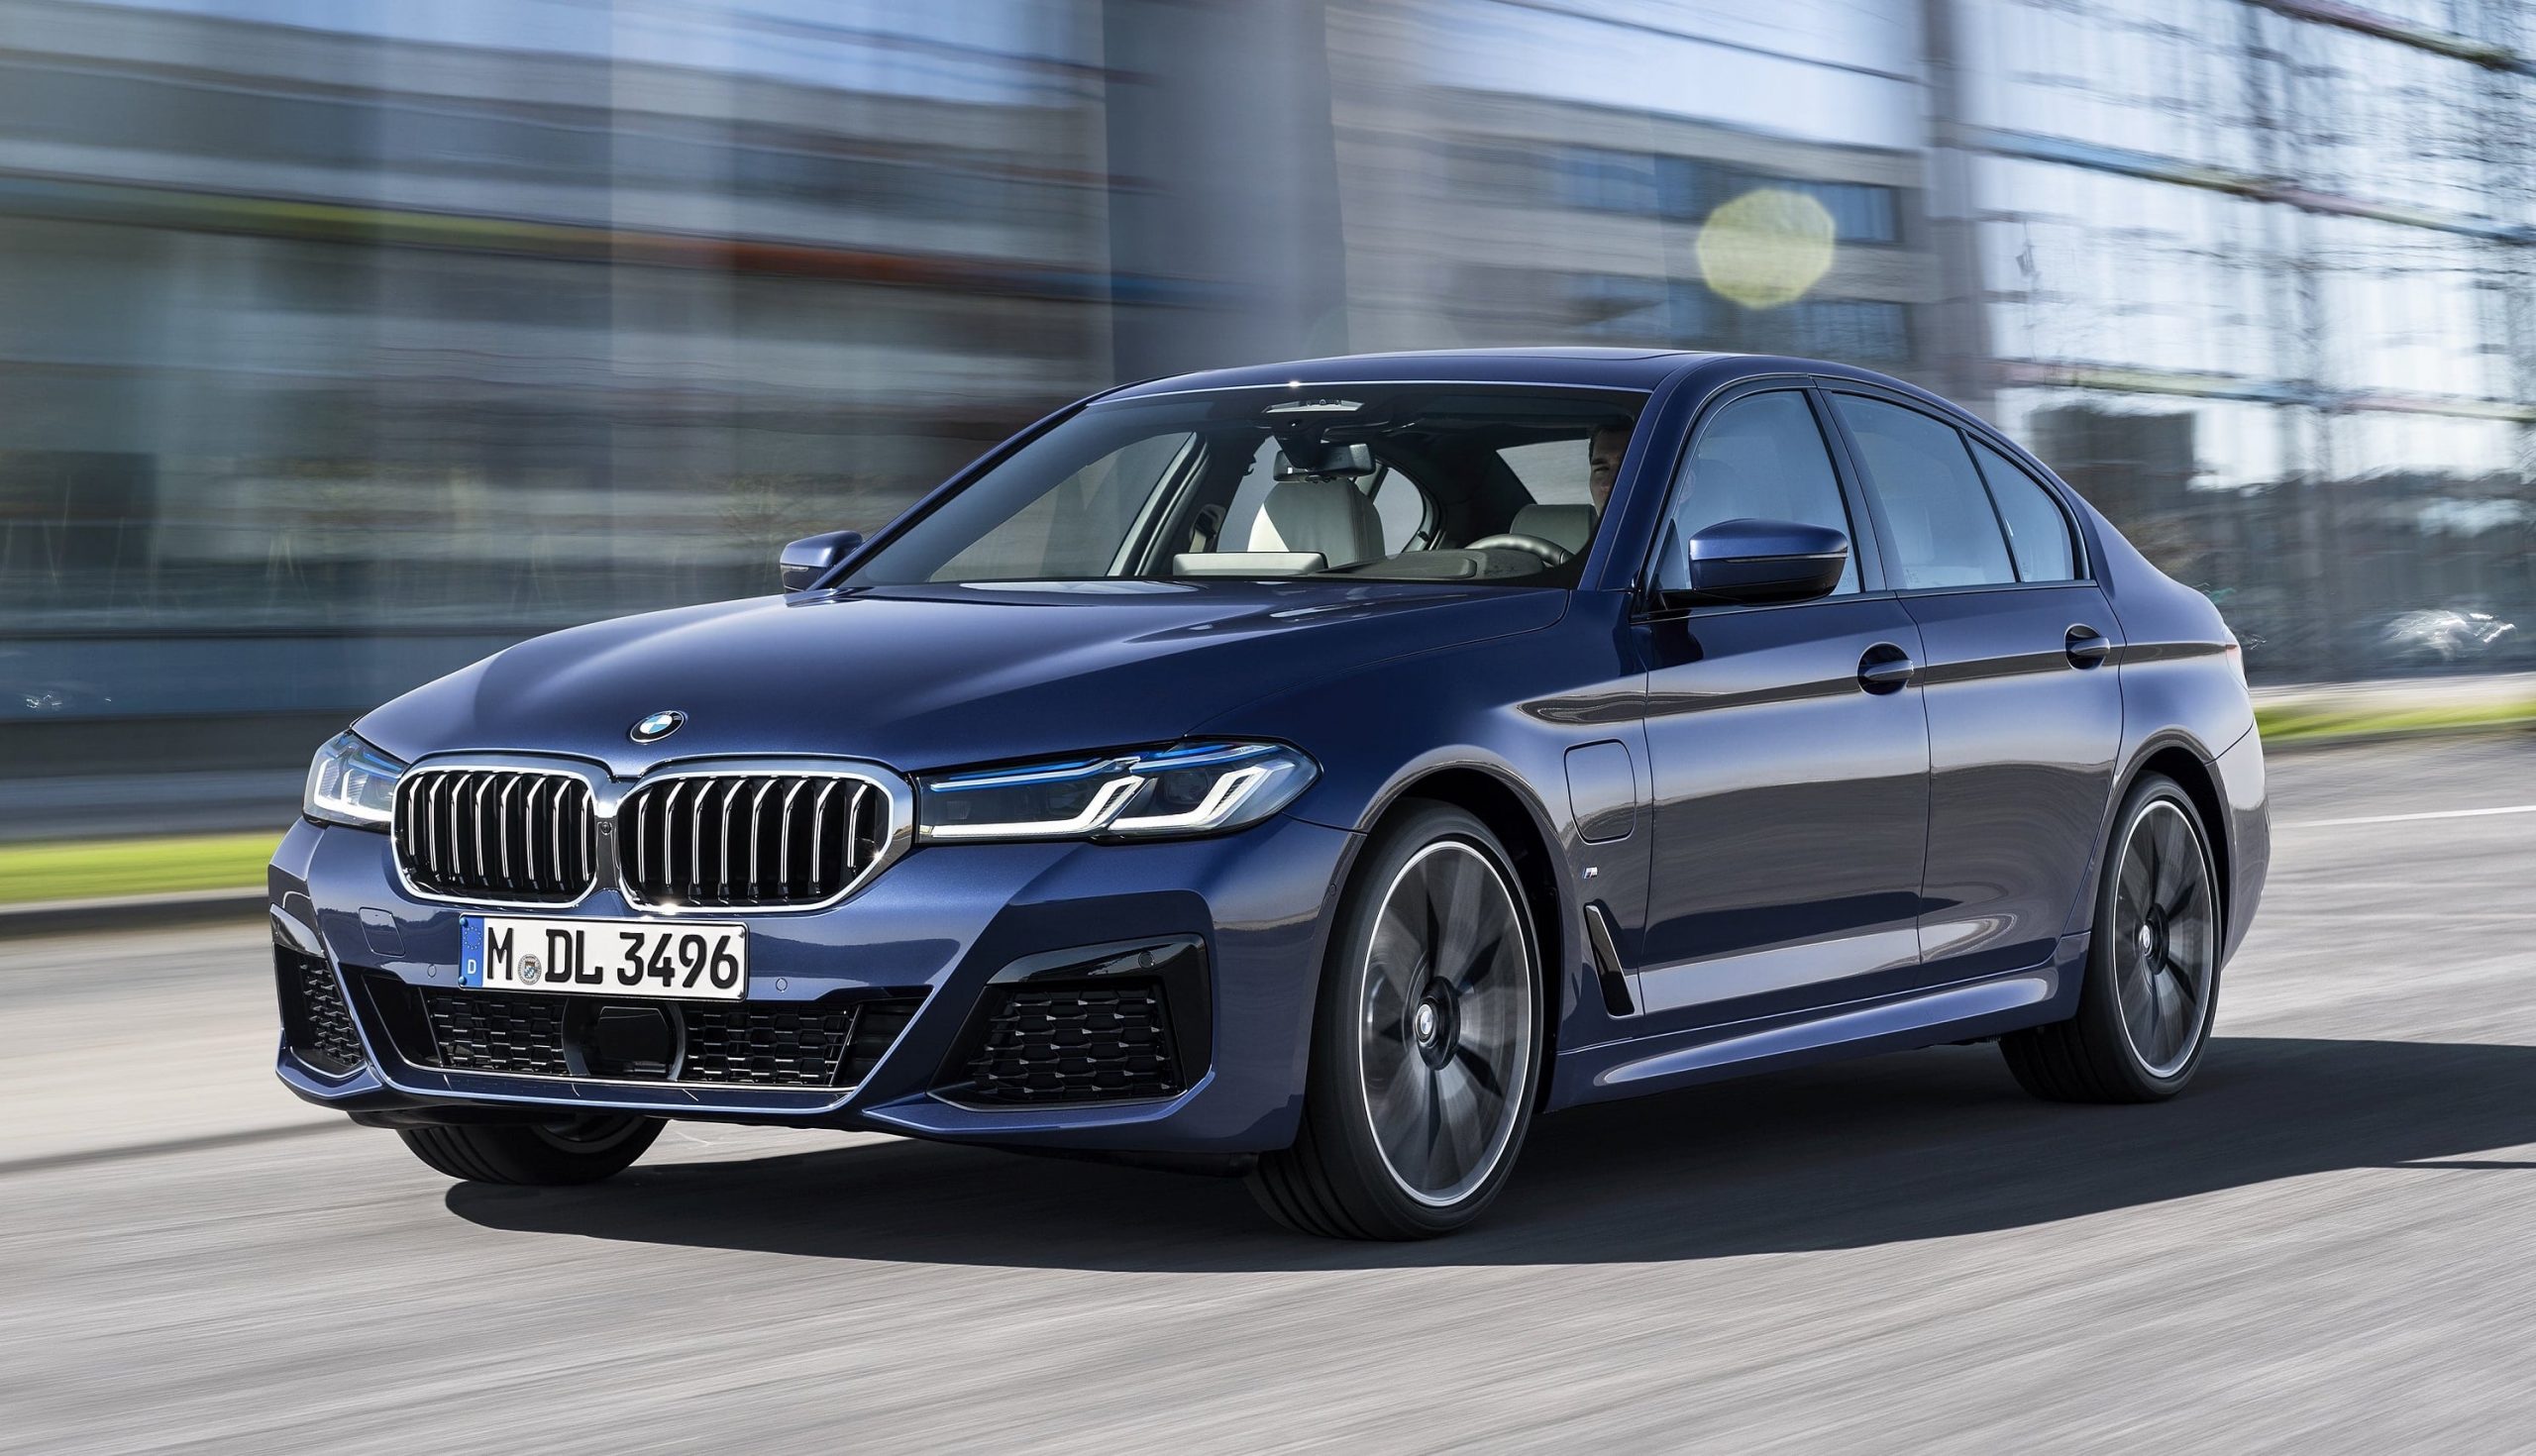 Facelifted BMW 530e And 530i M Sport Previewed Locally Automacha